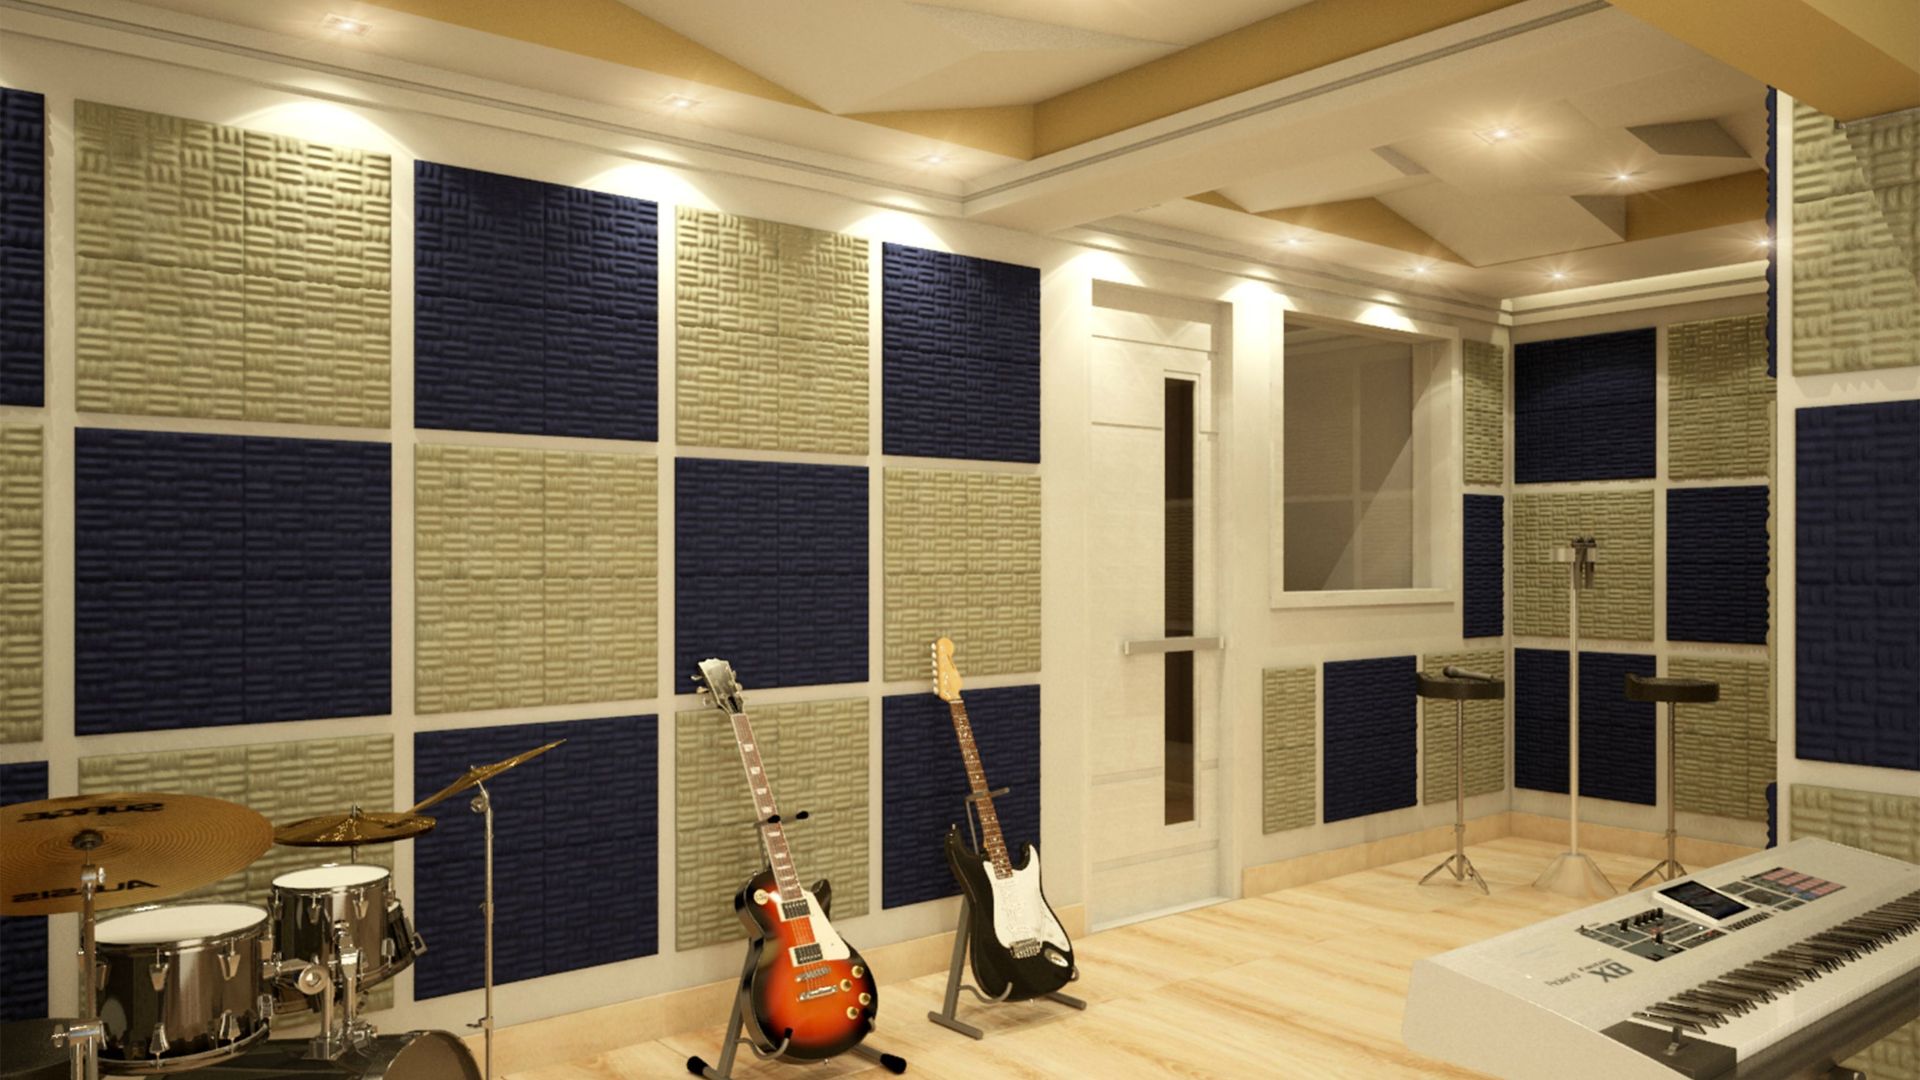 Thе Bеnеfits of Polyеstеr Acoustic Panеls in Soundproofing 